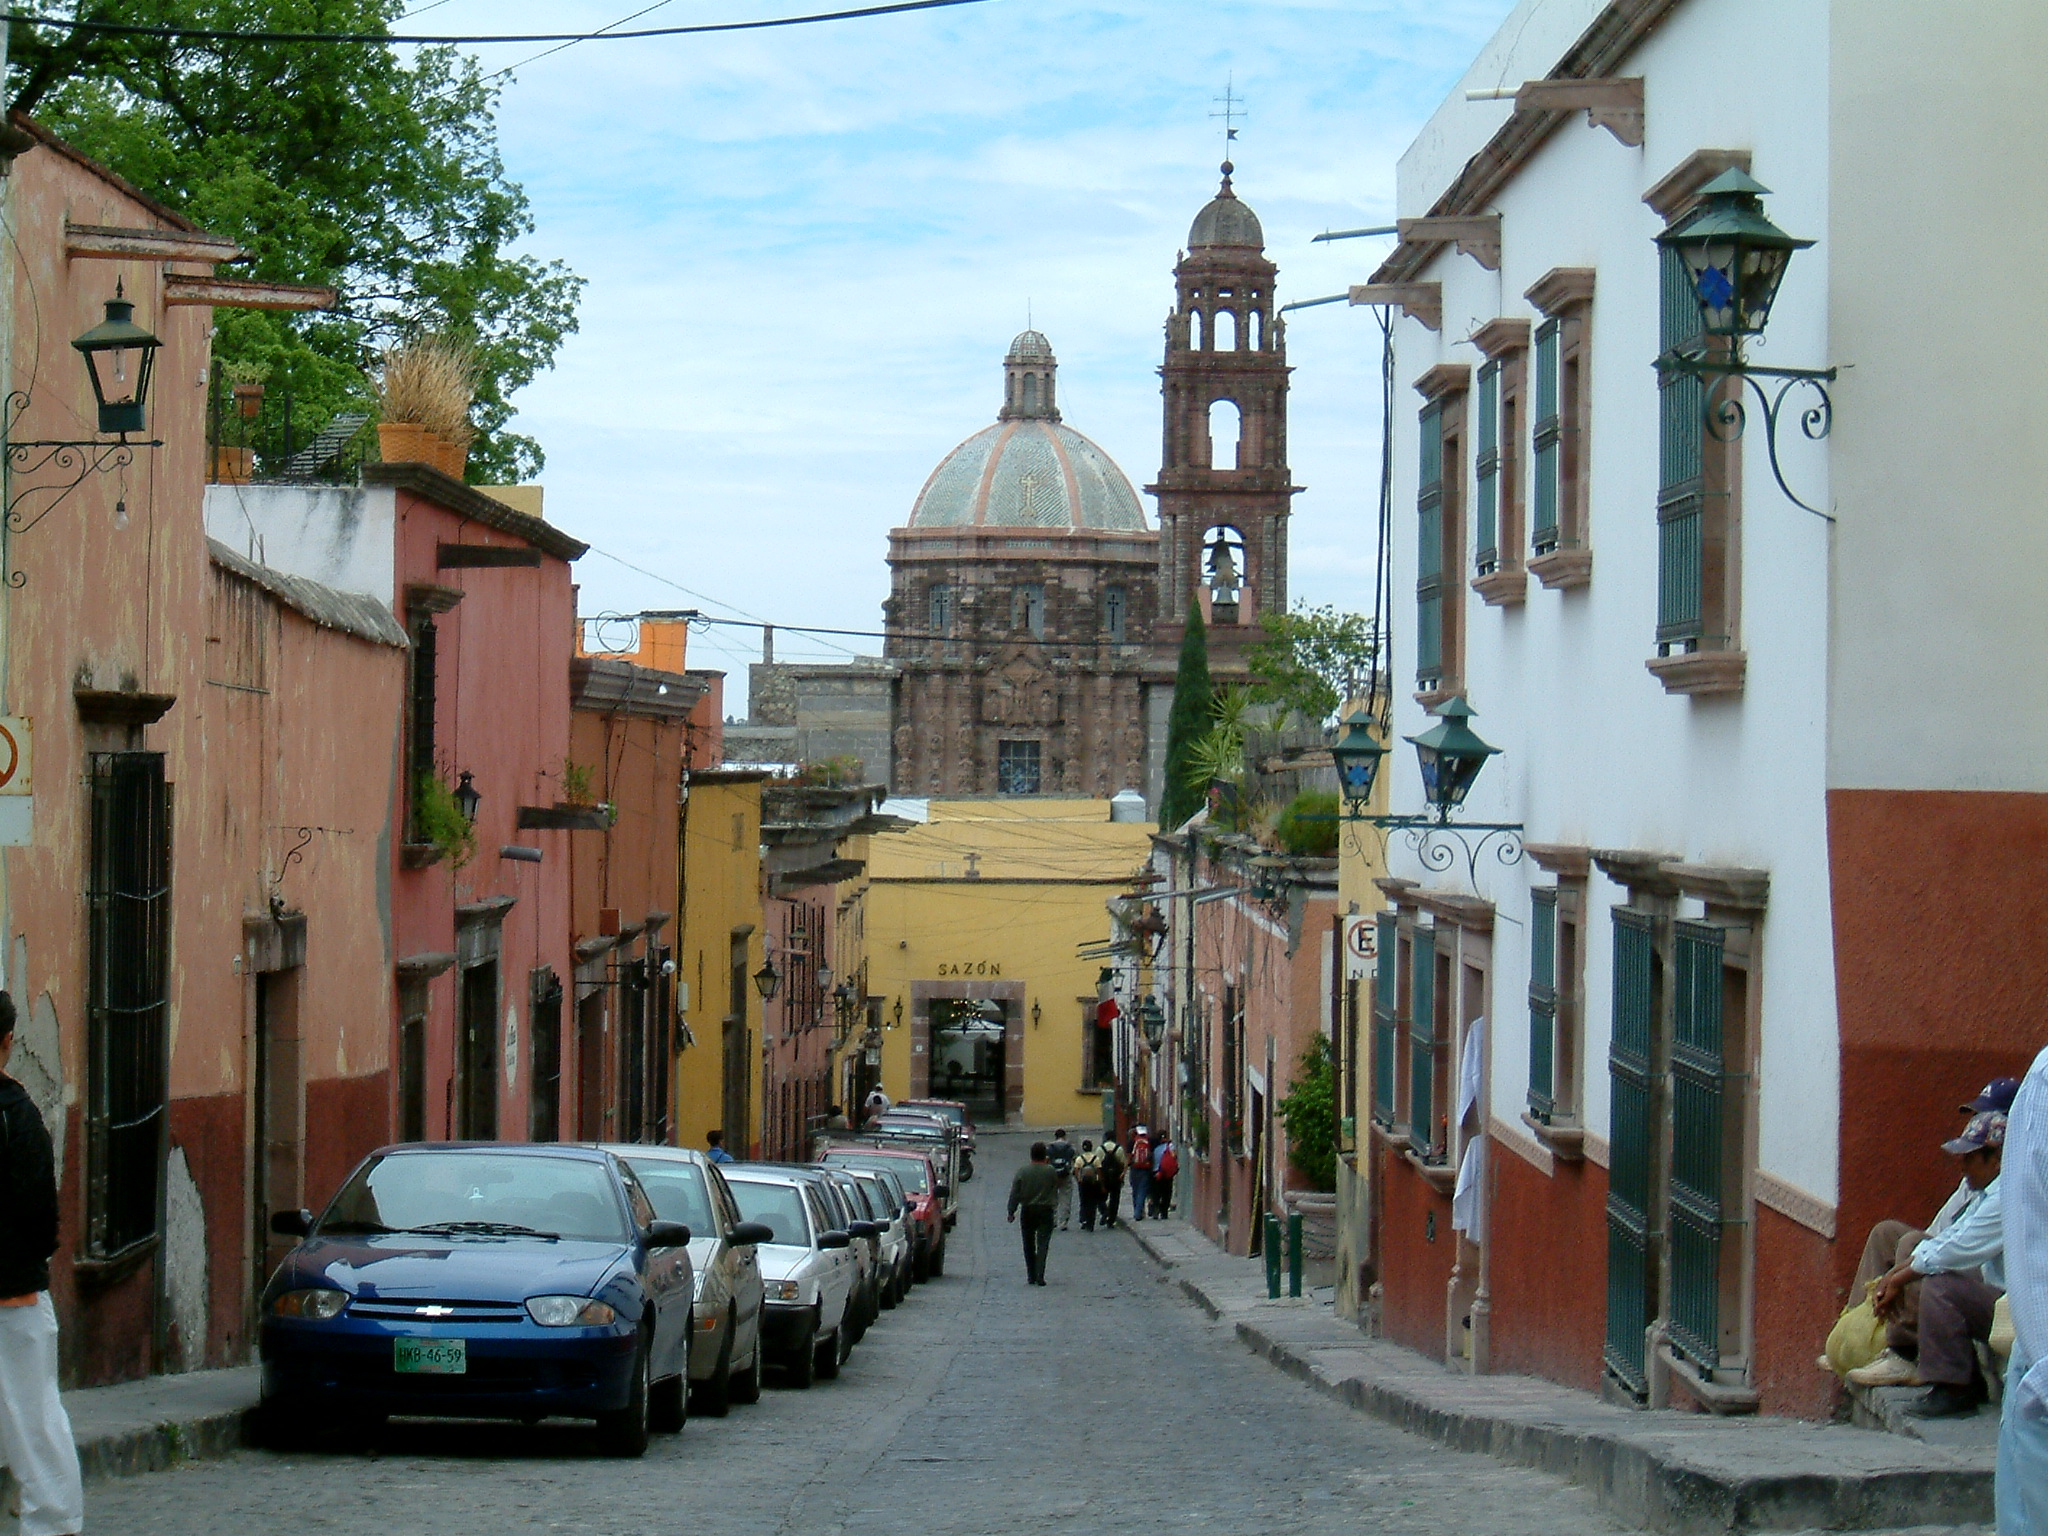 How many days to spend in san miguel de allende Experience San Miguel De Allende Mexperience